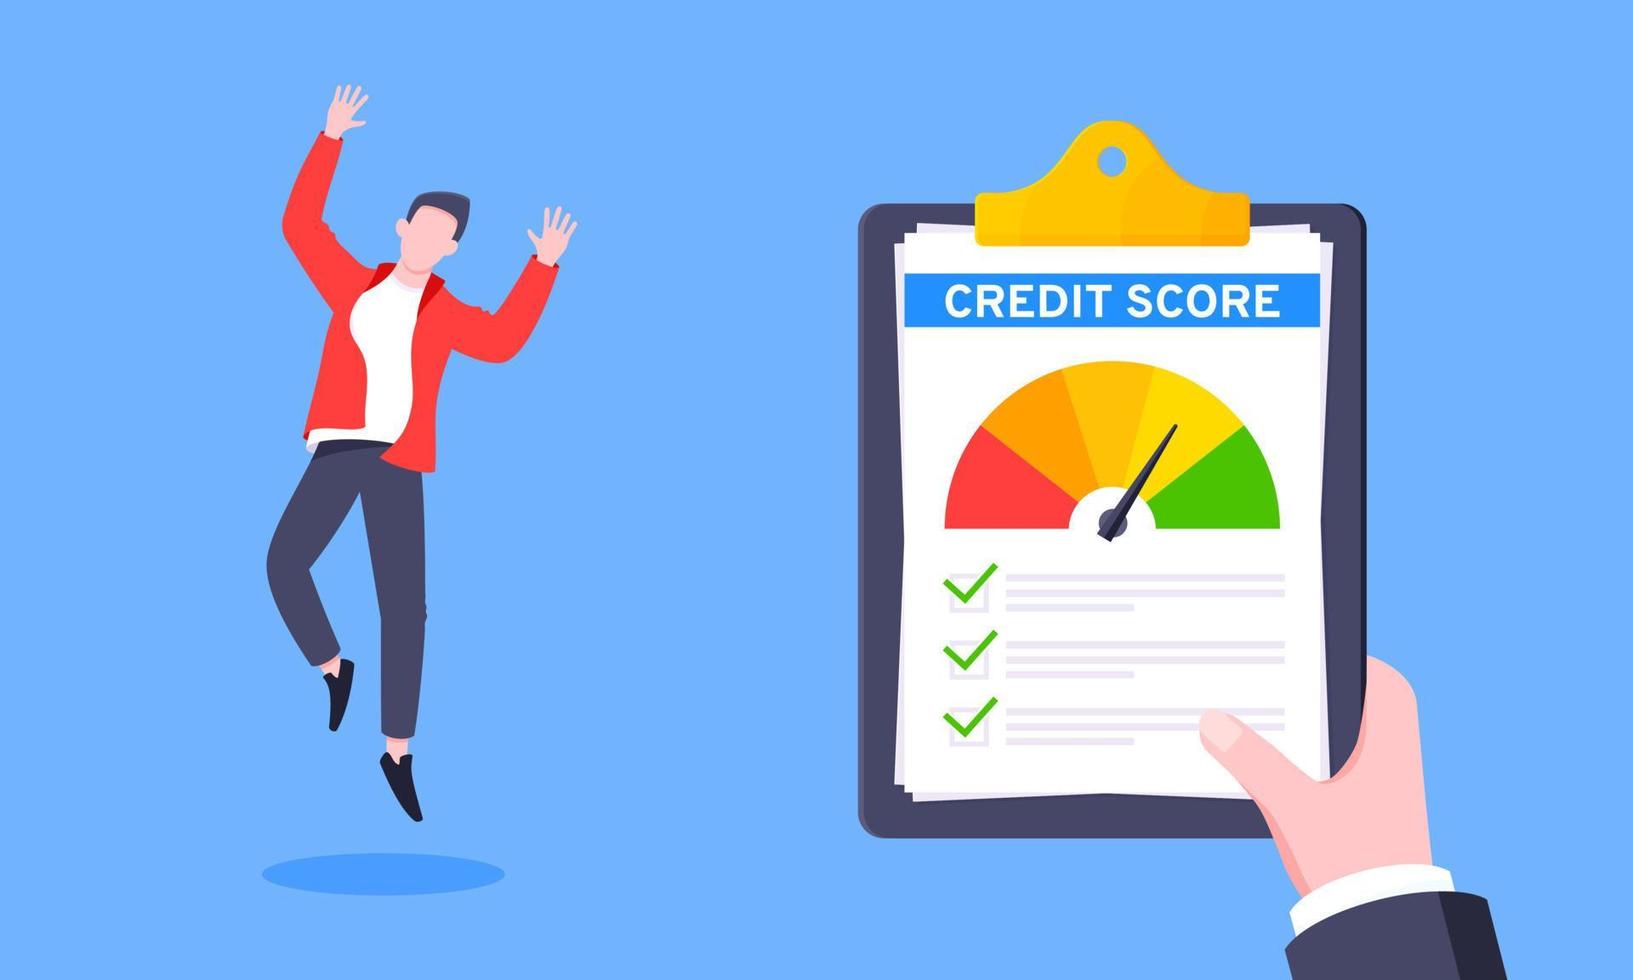 Good credit score business concept with clipboard, score gauge meter and happy person jumping in the air. vector